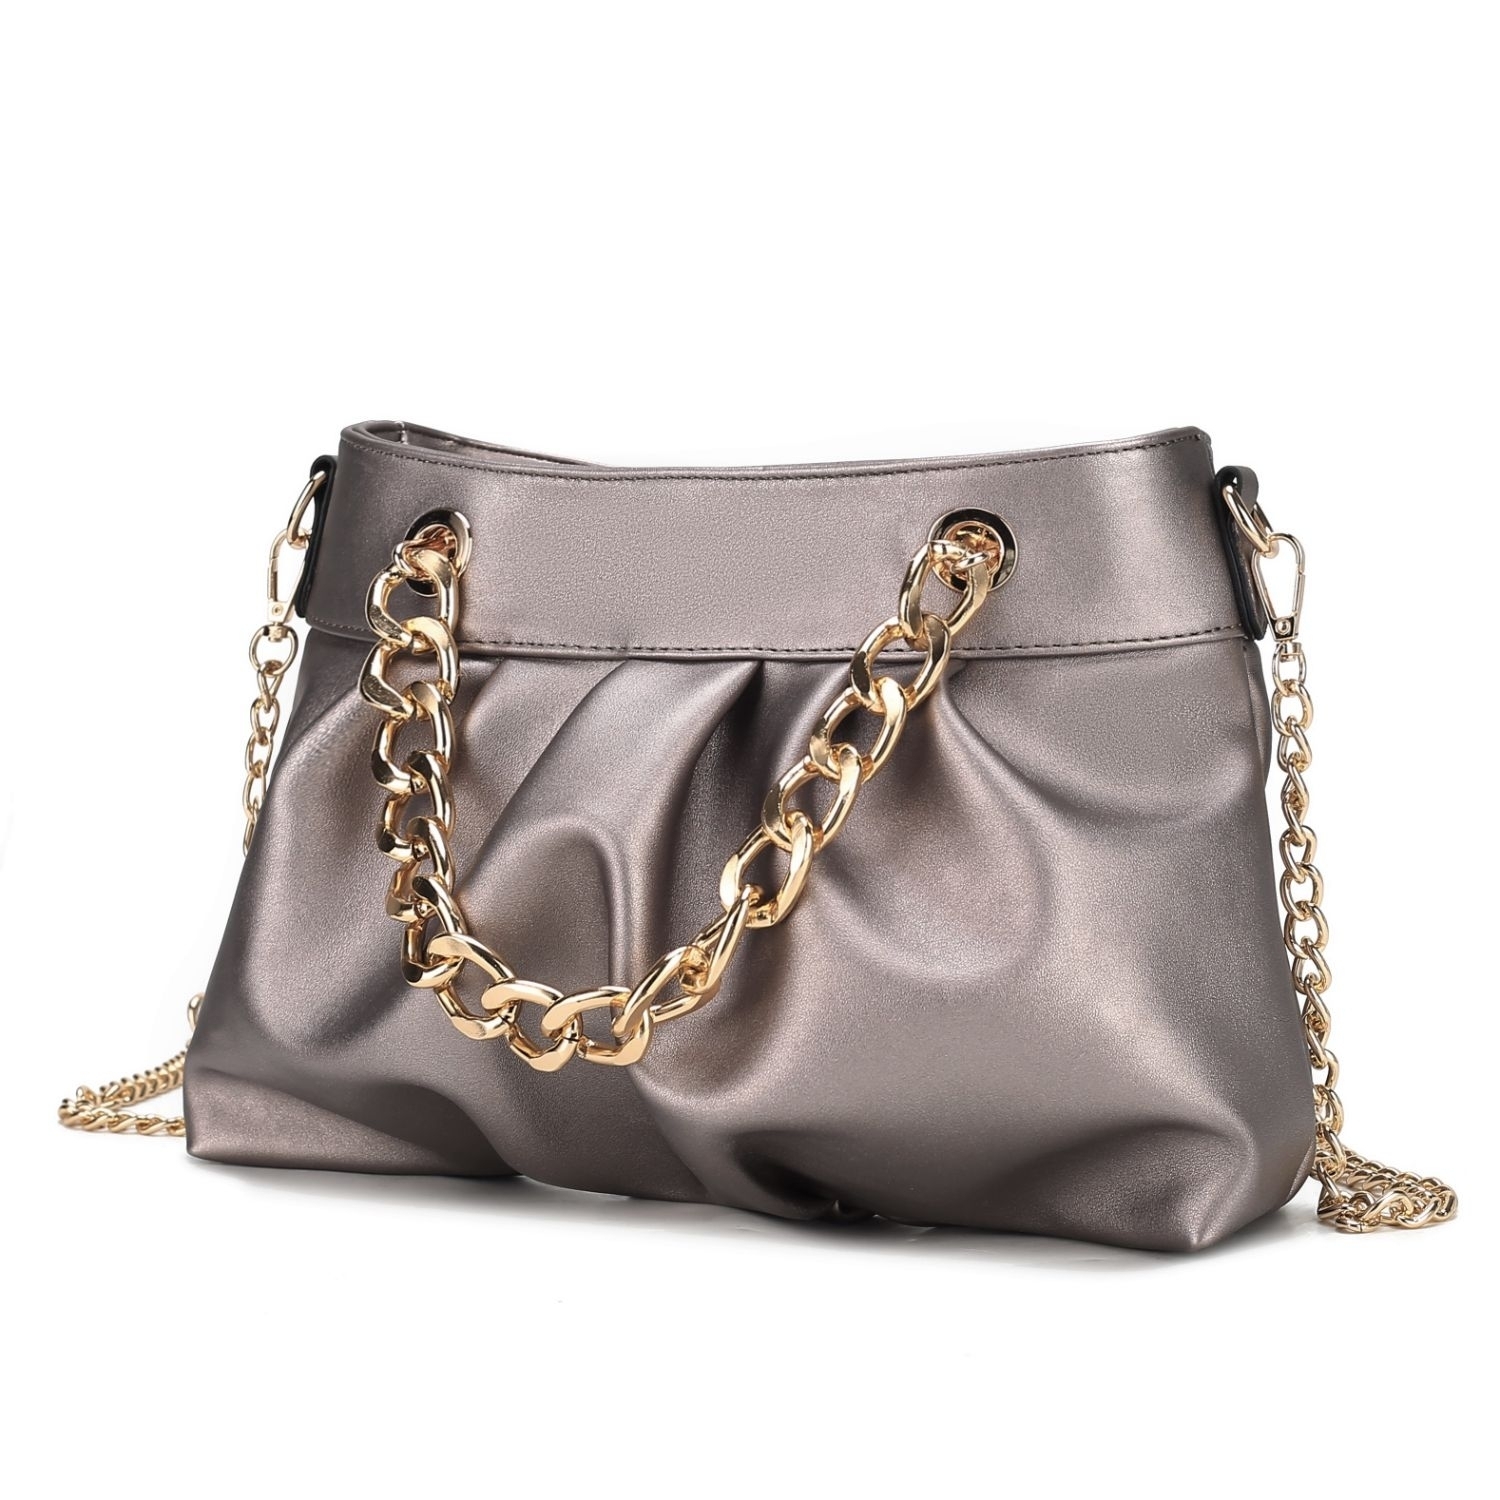 MKF Collection Marvila Minimalist Vegan Leather Chain Ruched Shoulder Bag By Mia K - Pewter